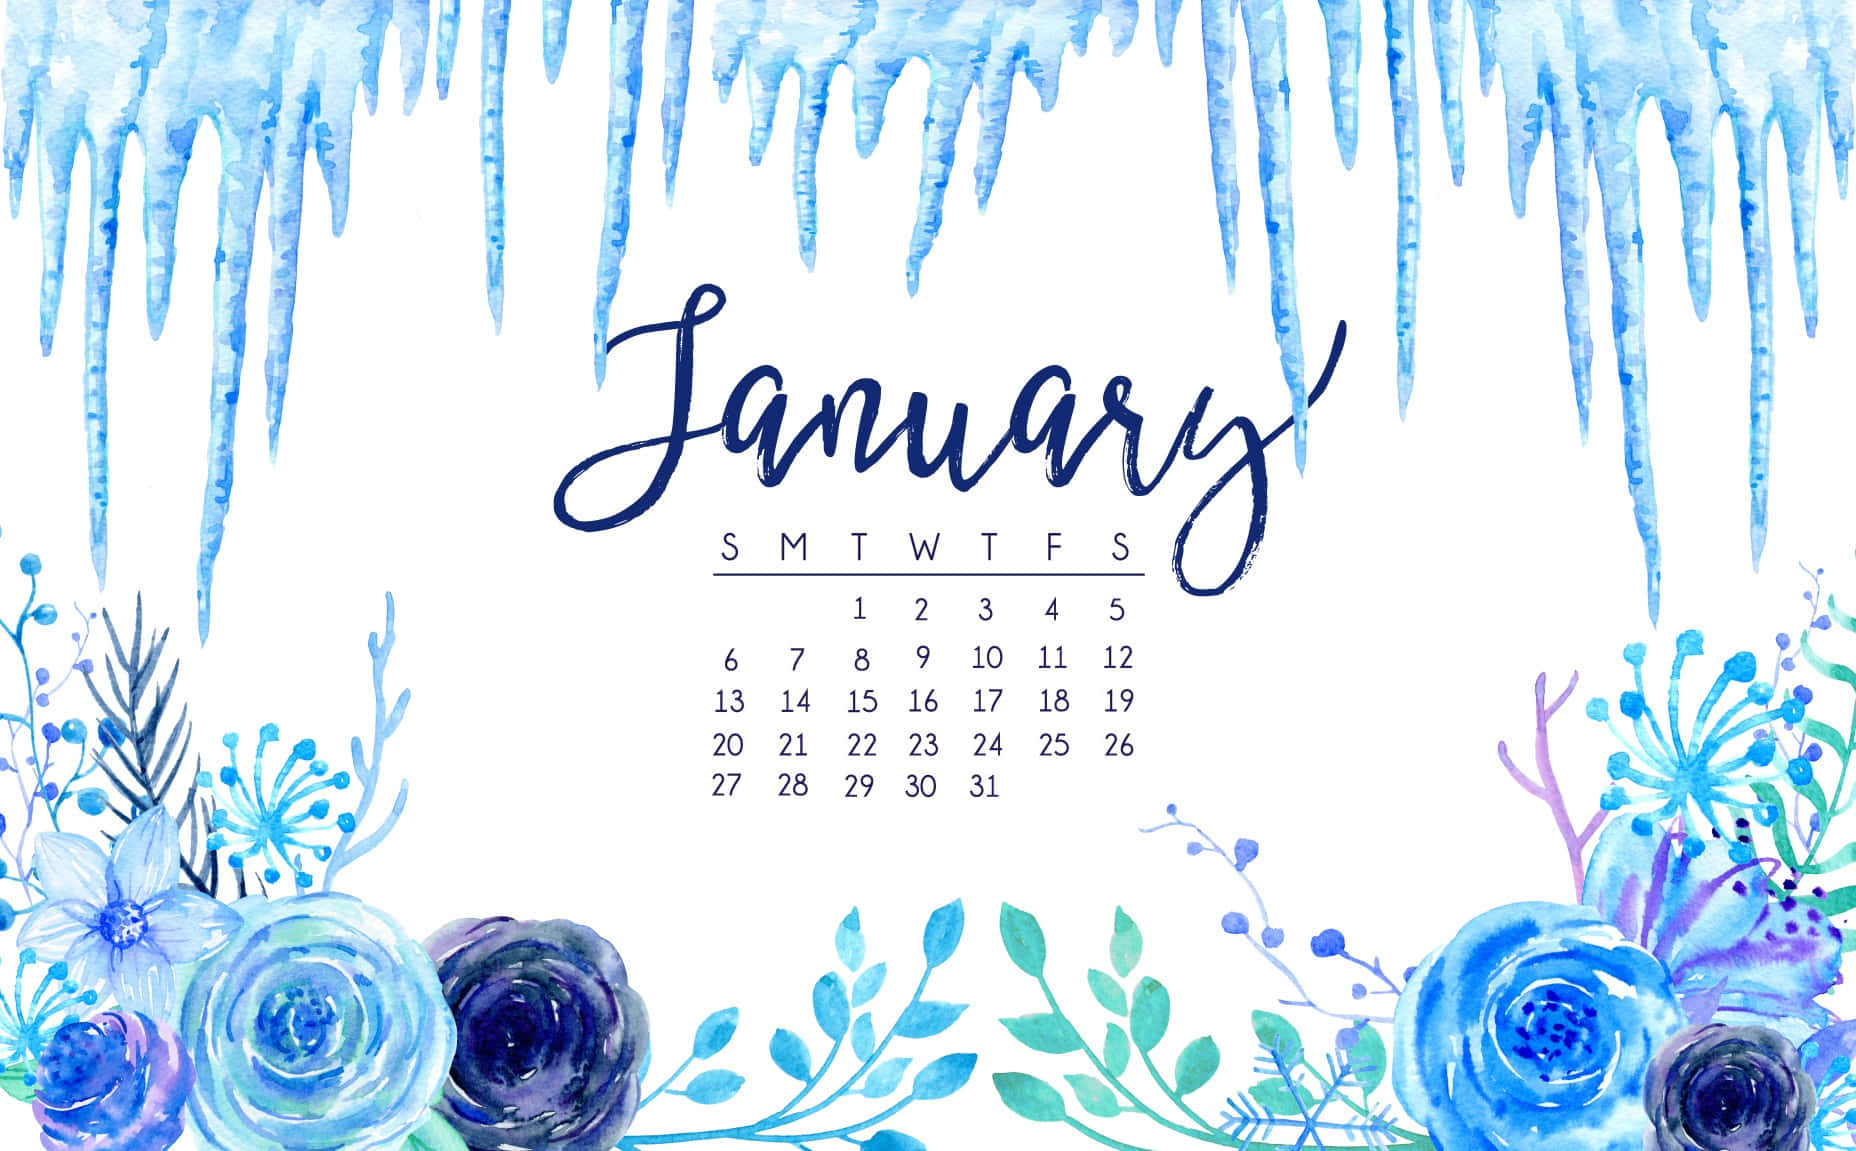 Celebrate the joy of January with a Cute January Wallpaper